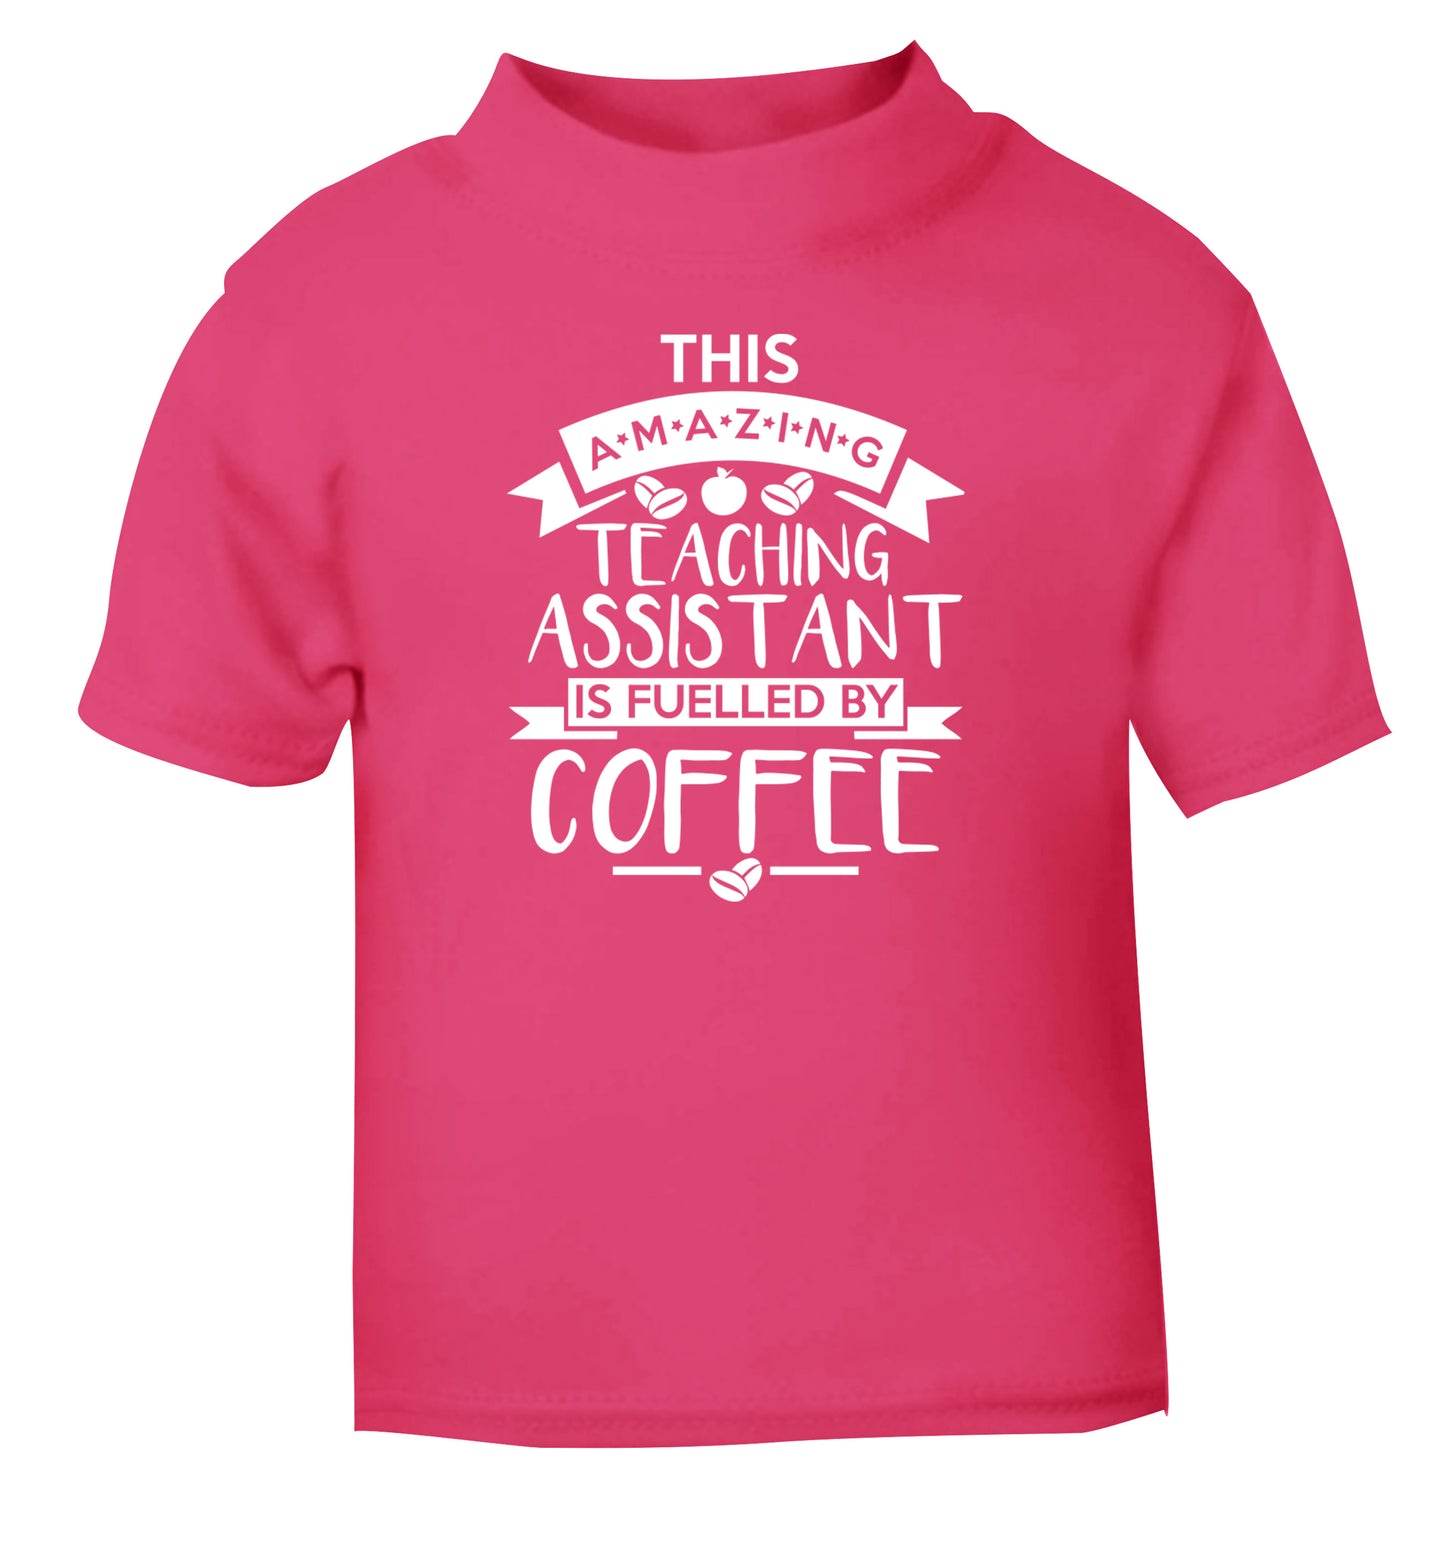 This amazing teaching assistant is fuelled by coffee pink Baby Toddler Tshirt 2 Years